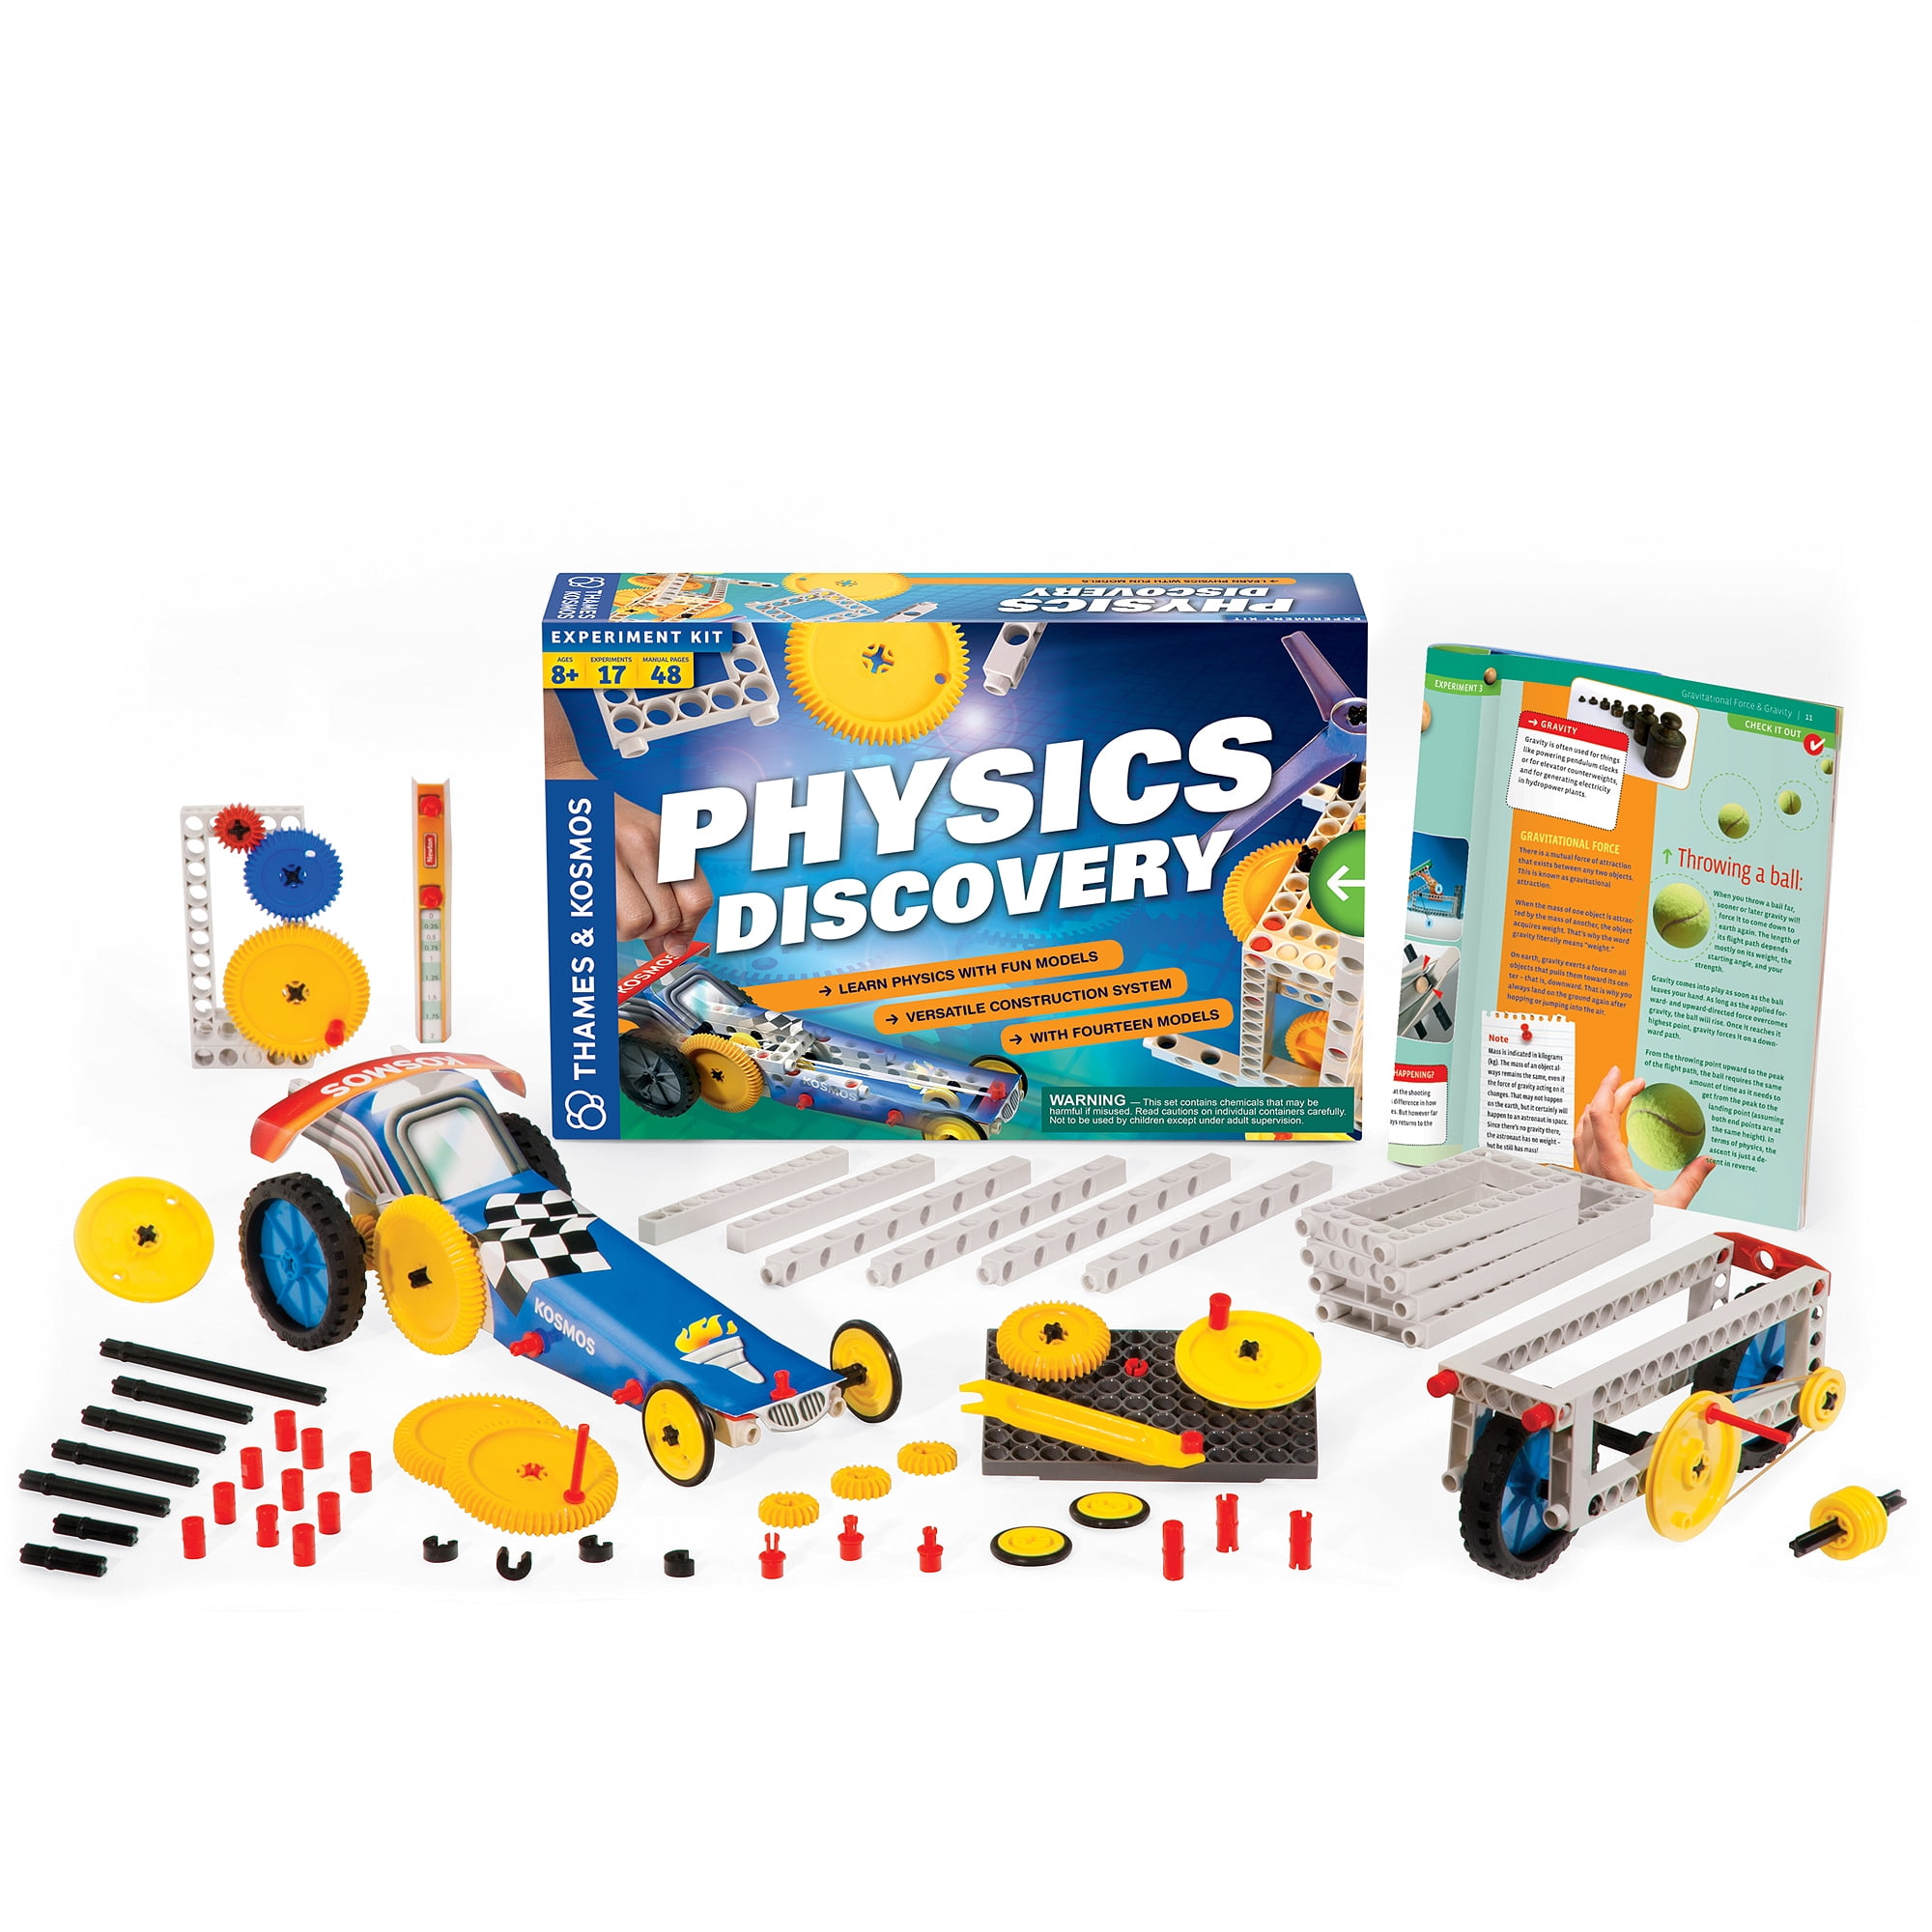 Thames /& Kosmos Physics Pro V 2.0 17 Science Experiments 25 Building Projects for sale online